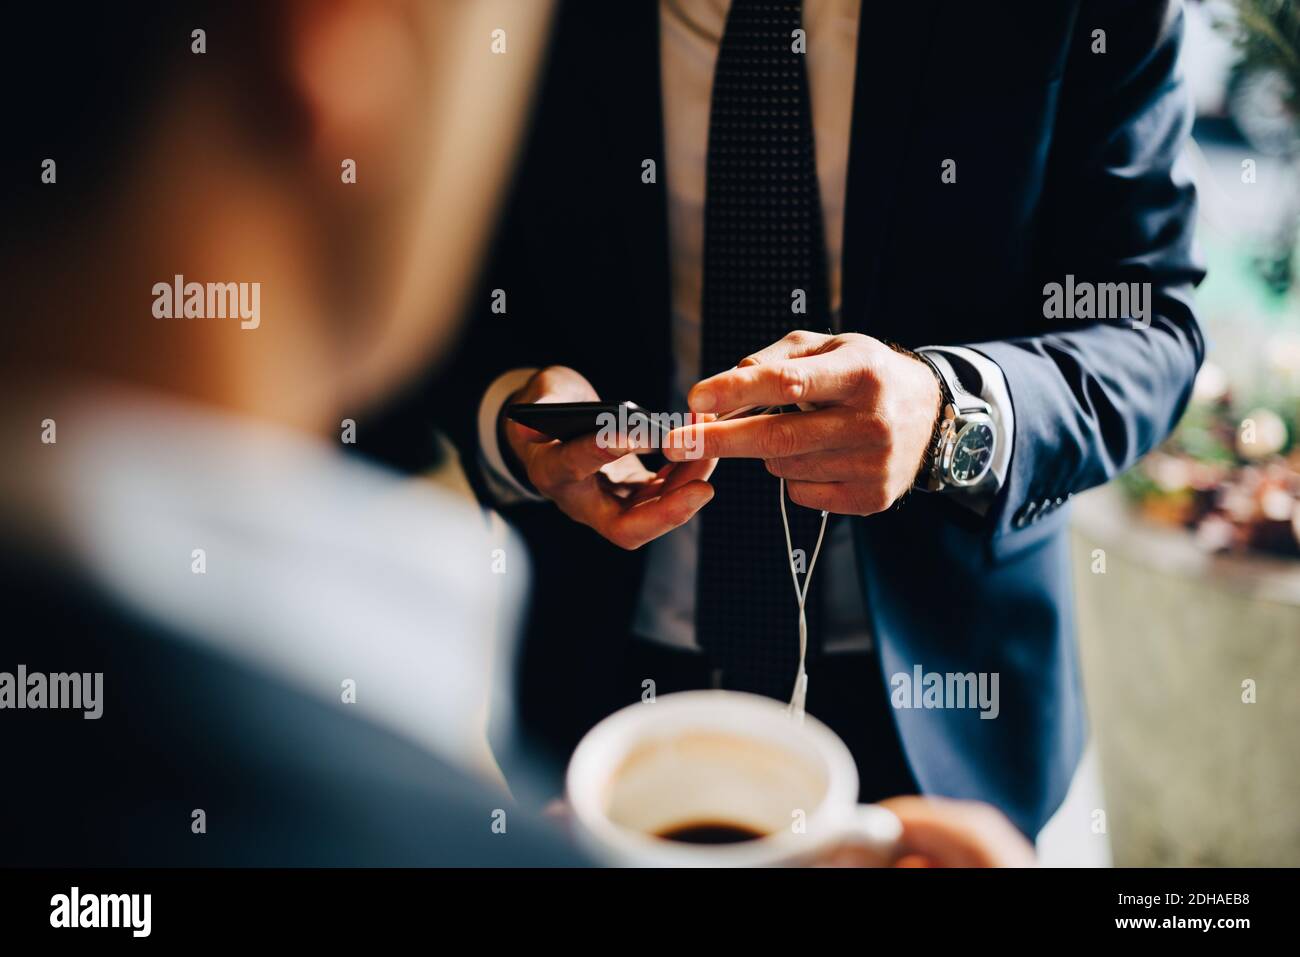 Midsection of businessman using smart phone while standing with colleague drinking coffee at cafe Stock Photo